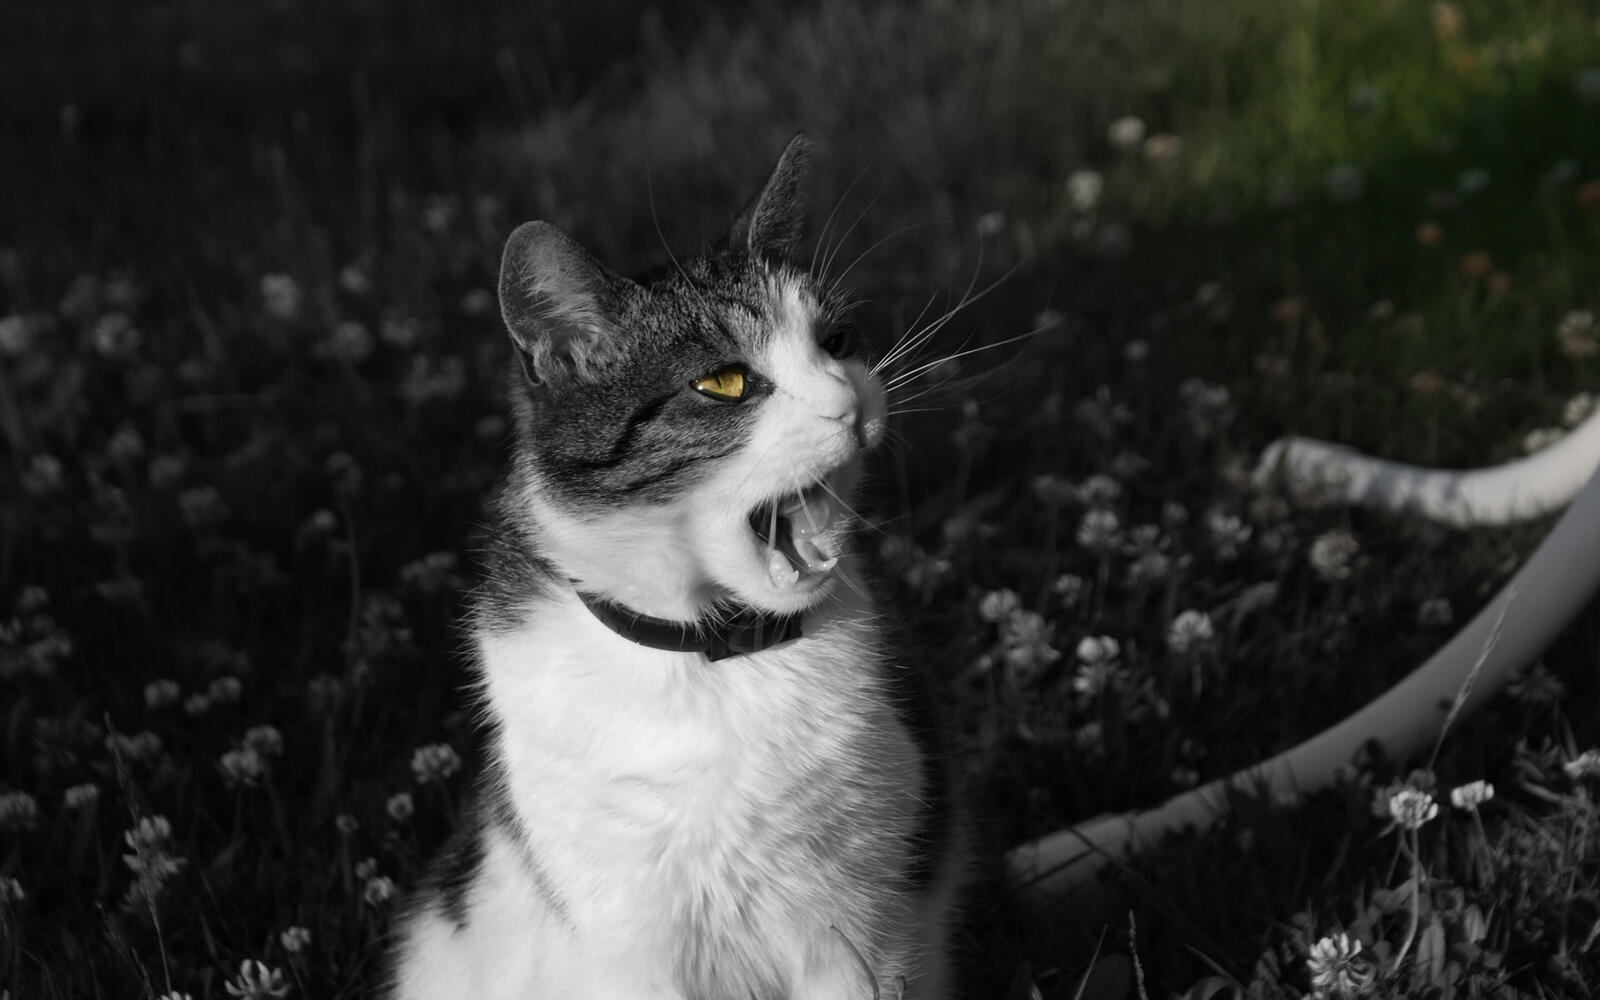 Wallpapers cat yawn photo on the desktop